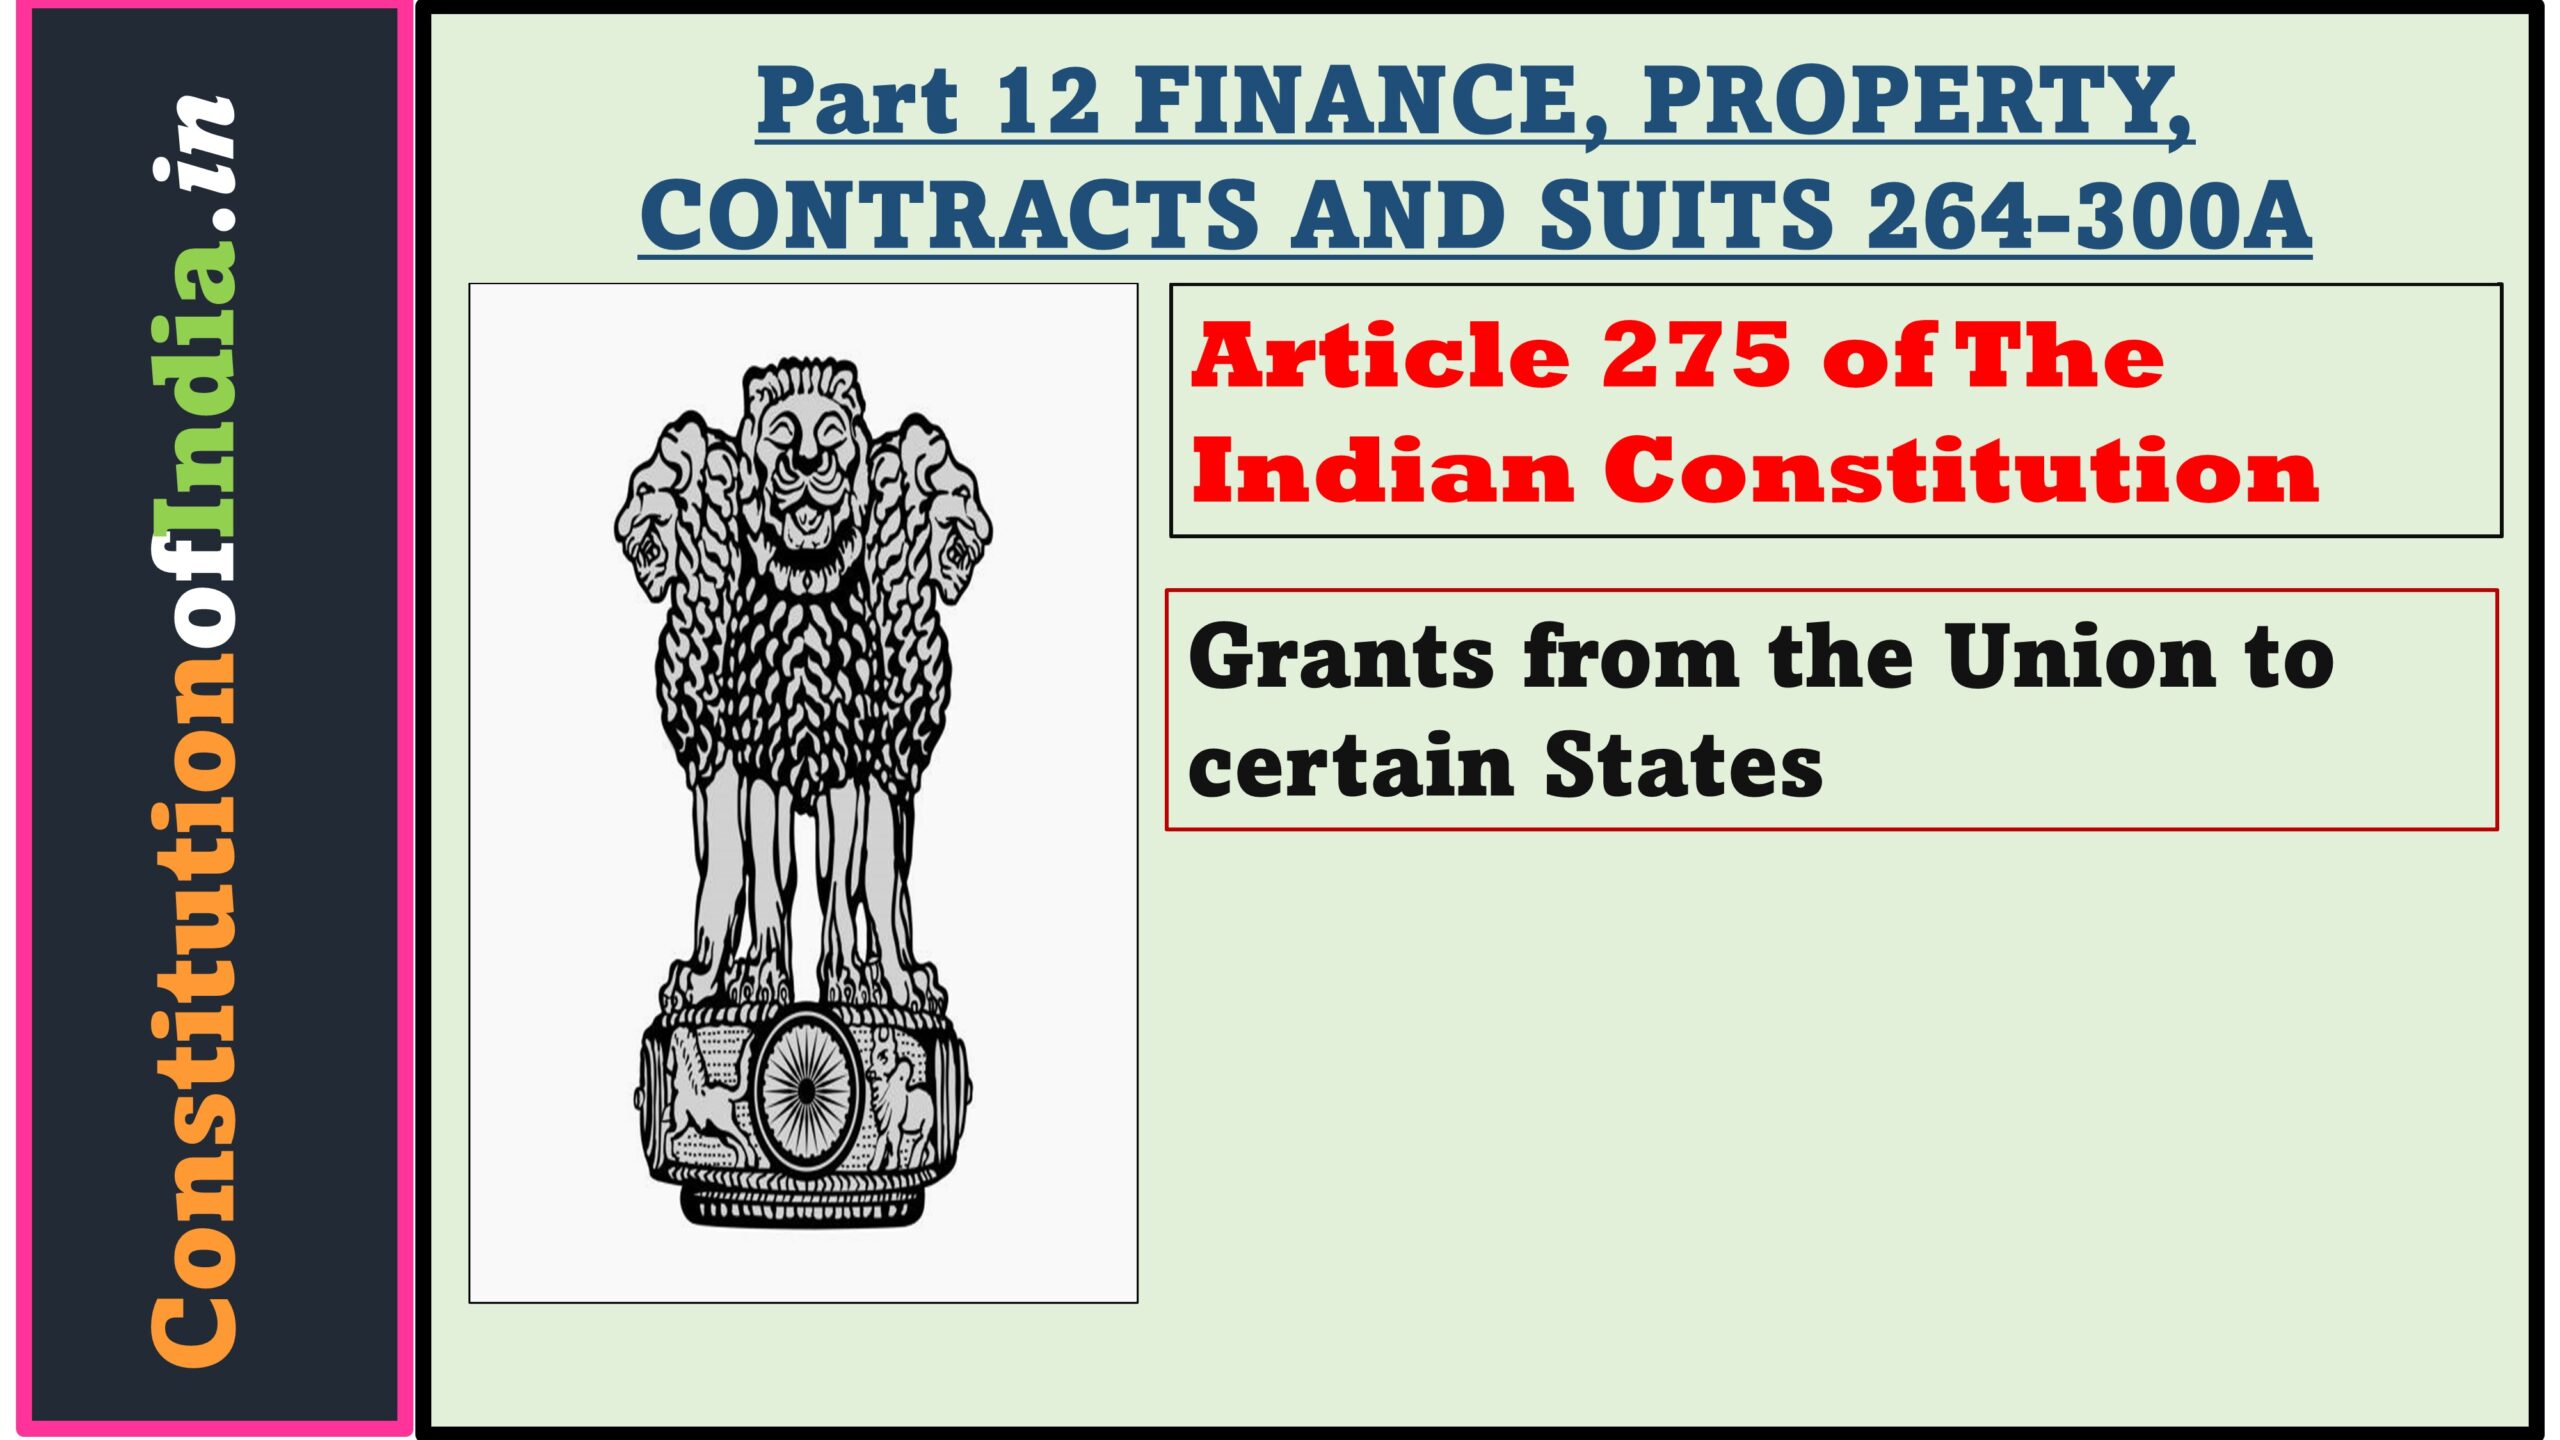 Article 275 of The Indian Constitution